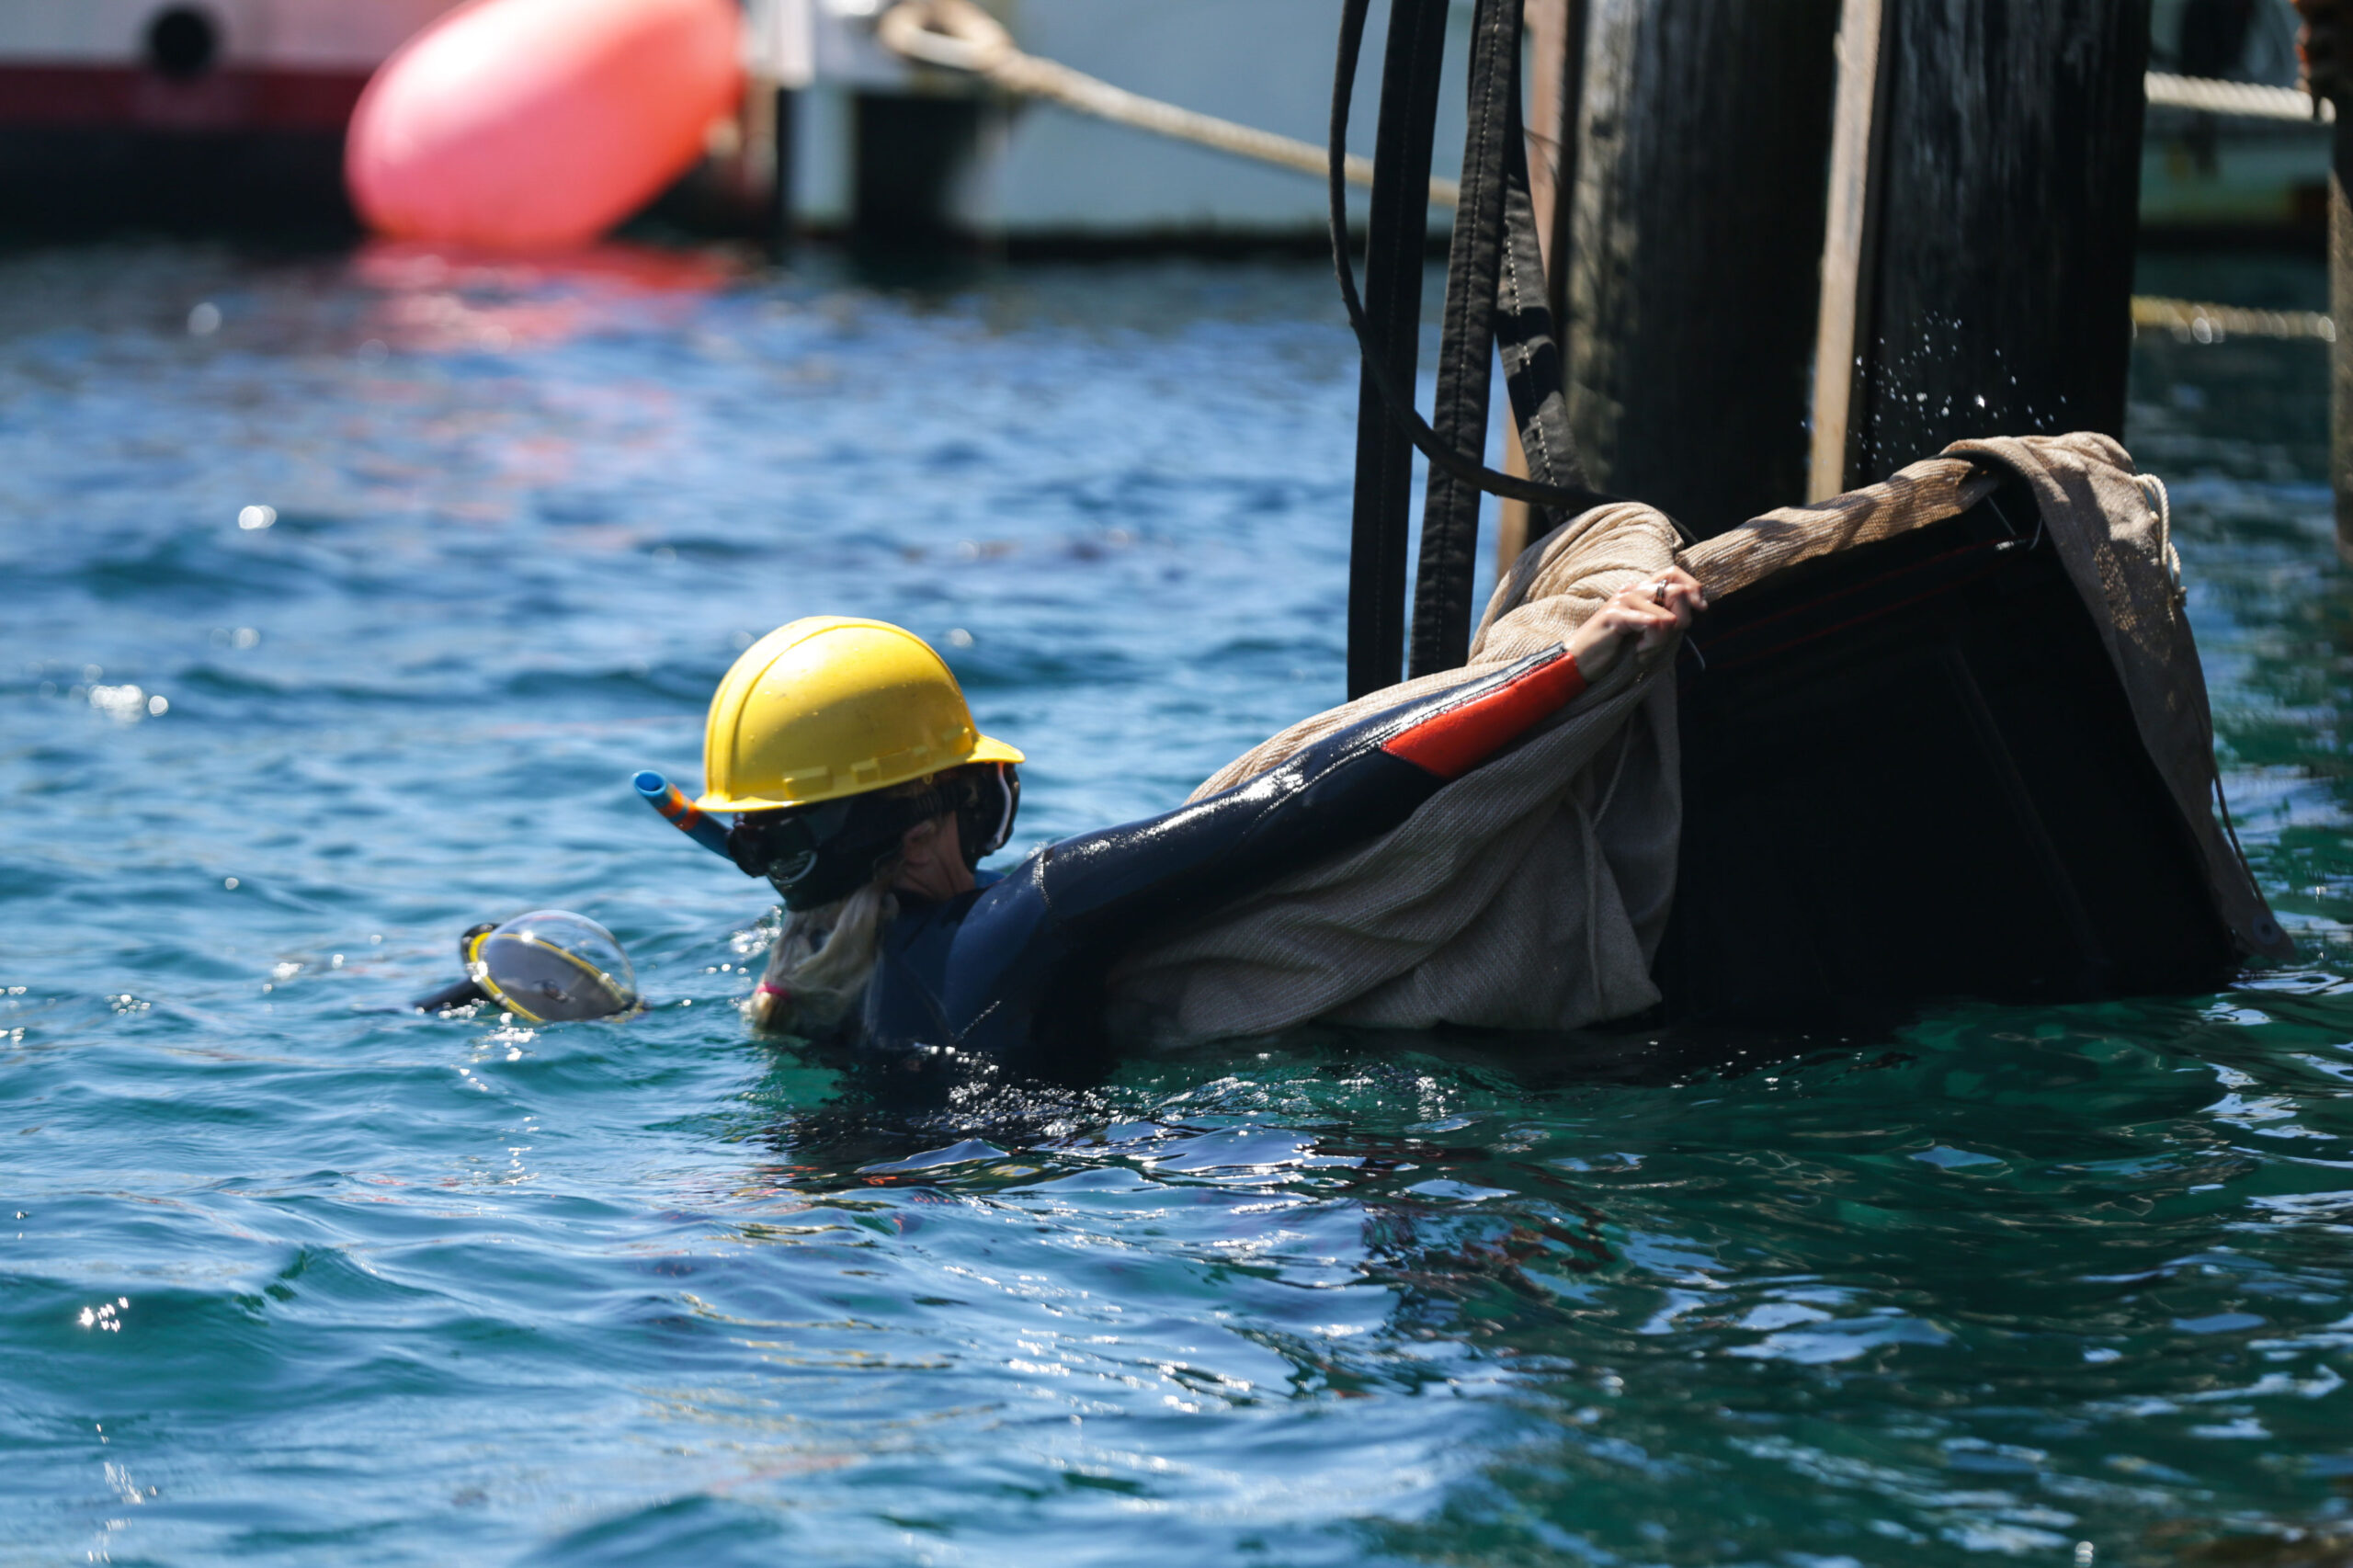 a person wearing a yellow helmet and wetsuit helps lower a large, burlap-covered tank into the waters of an ocean cove